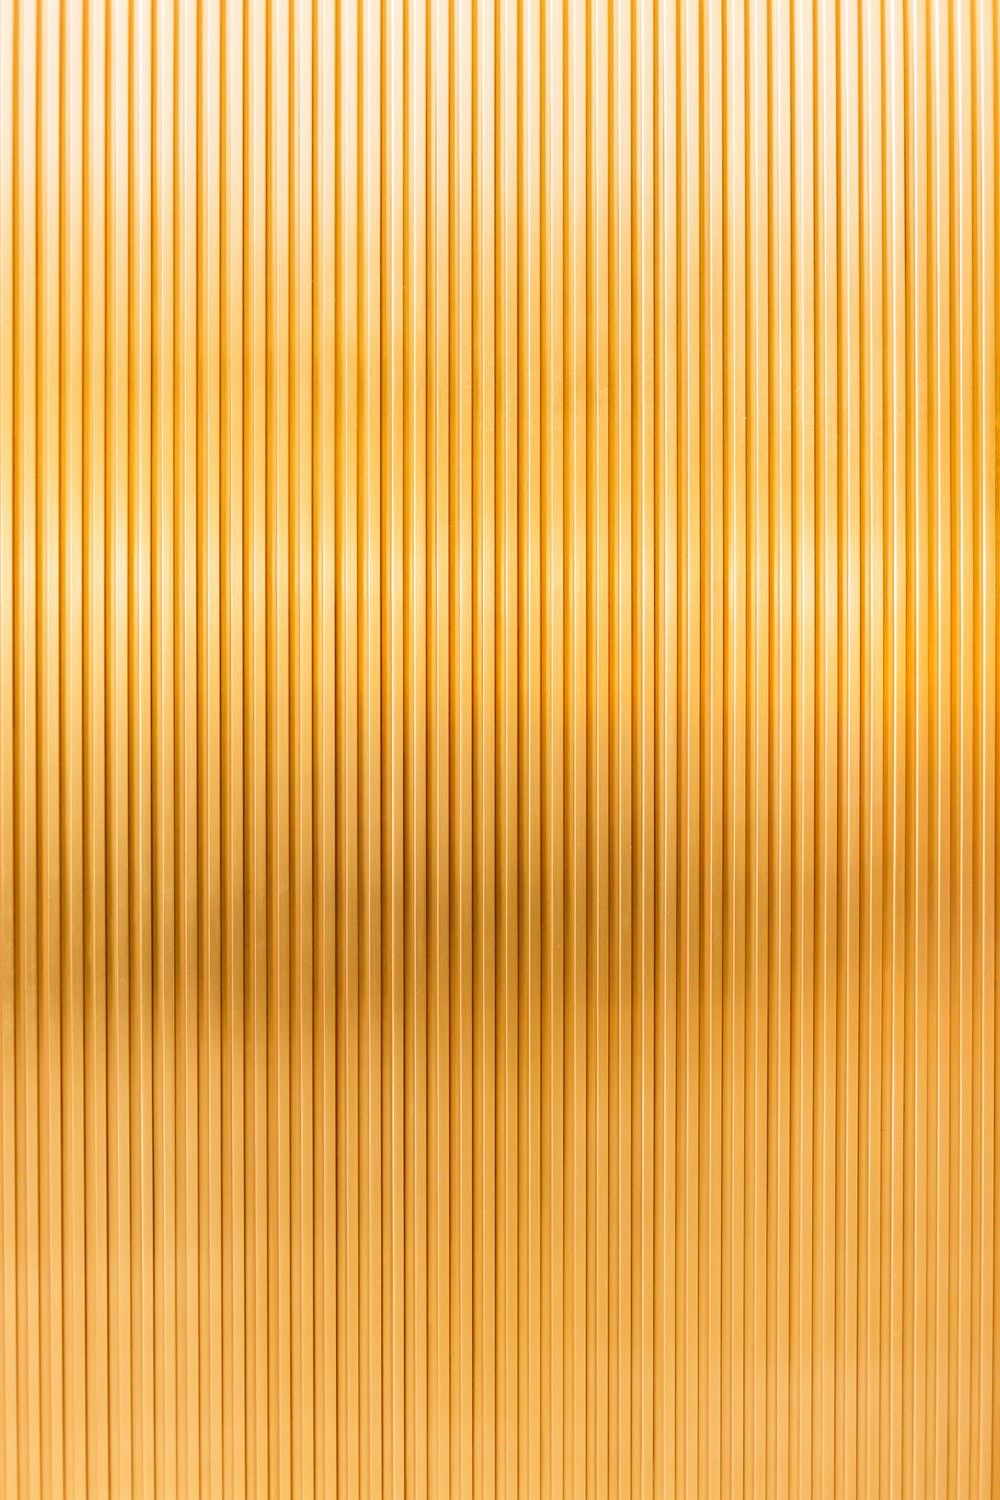 Gold Texture Picture. Download Free Image